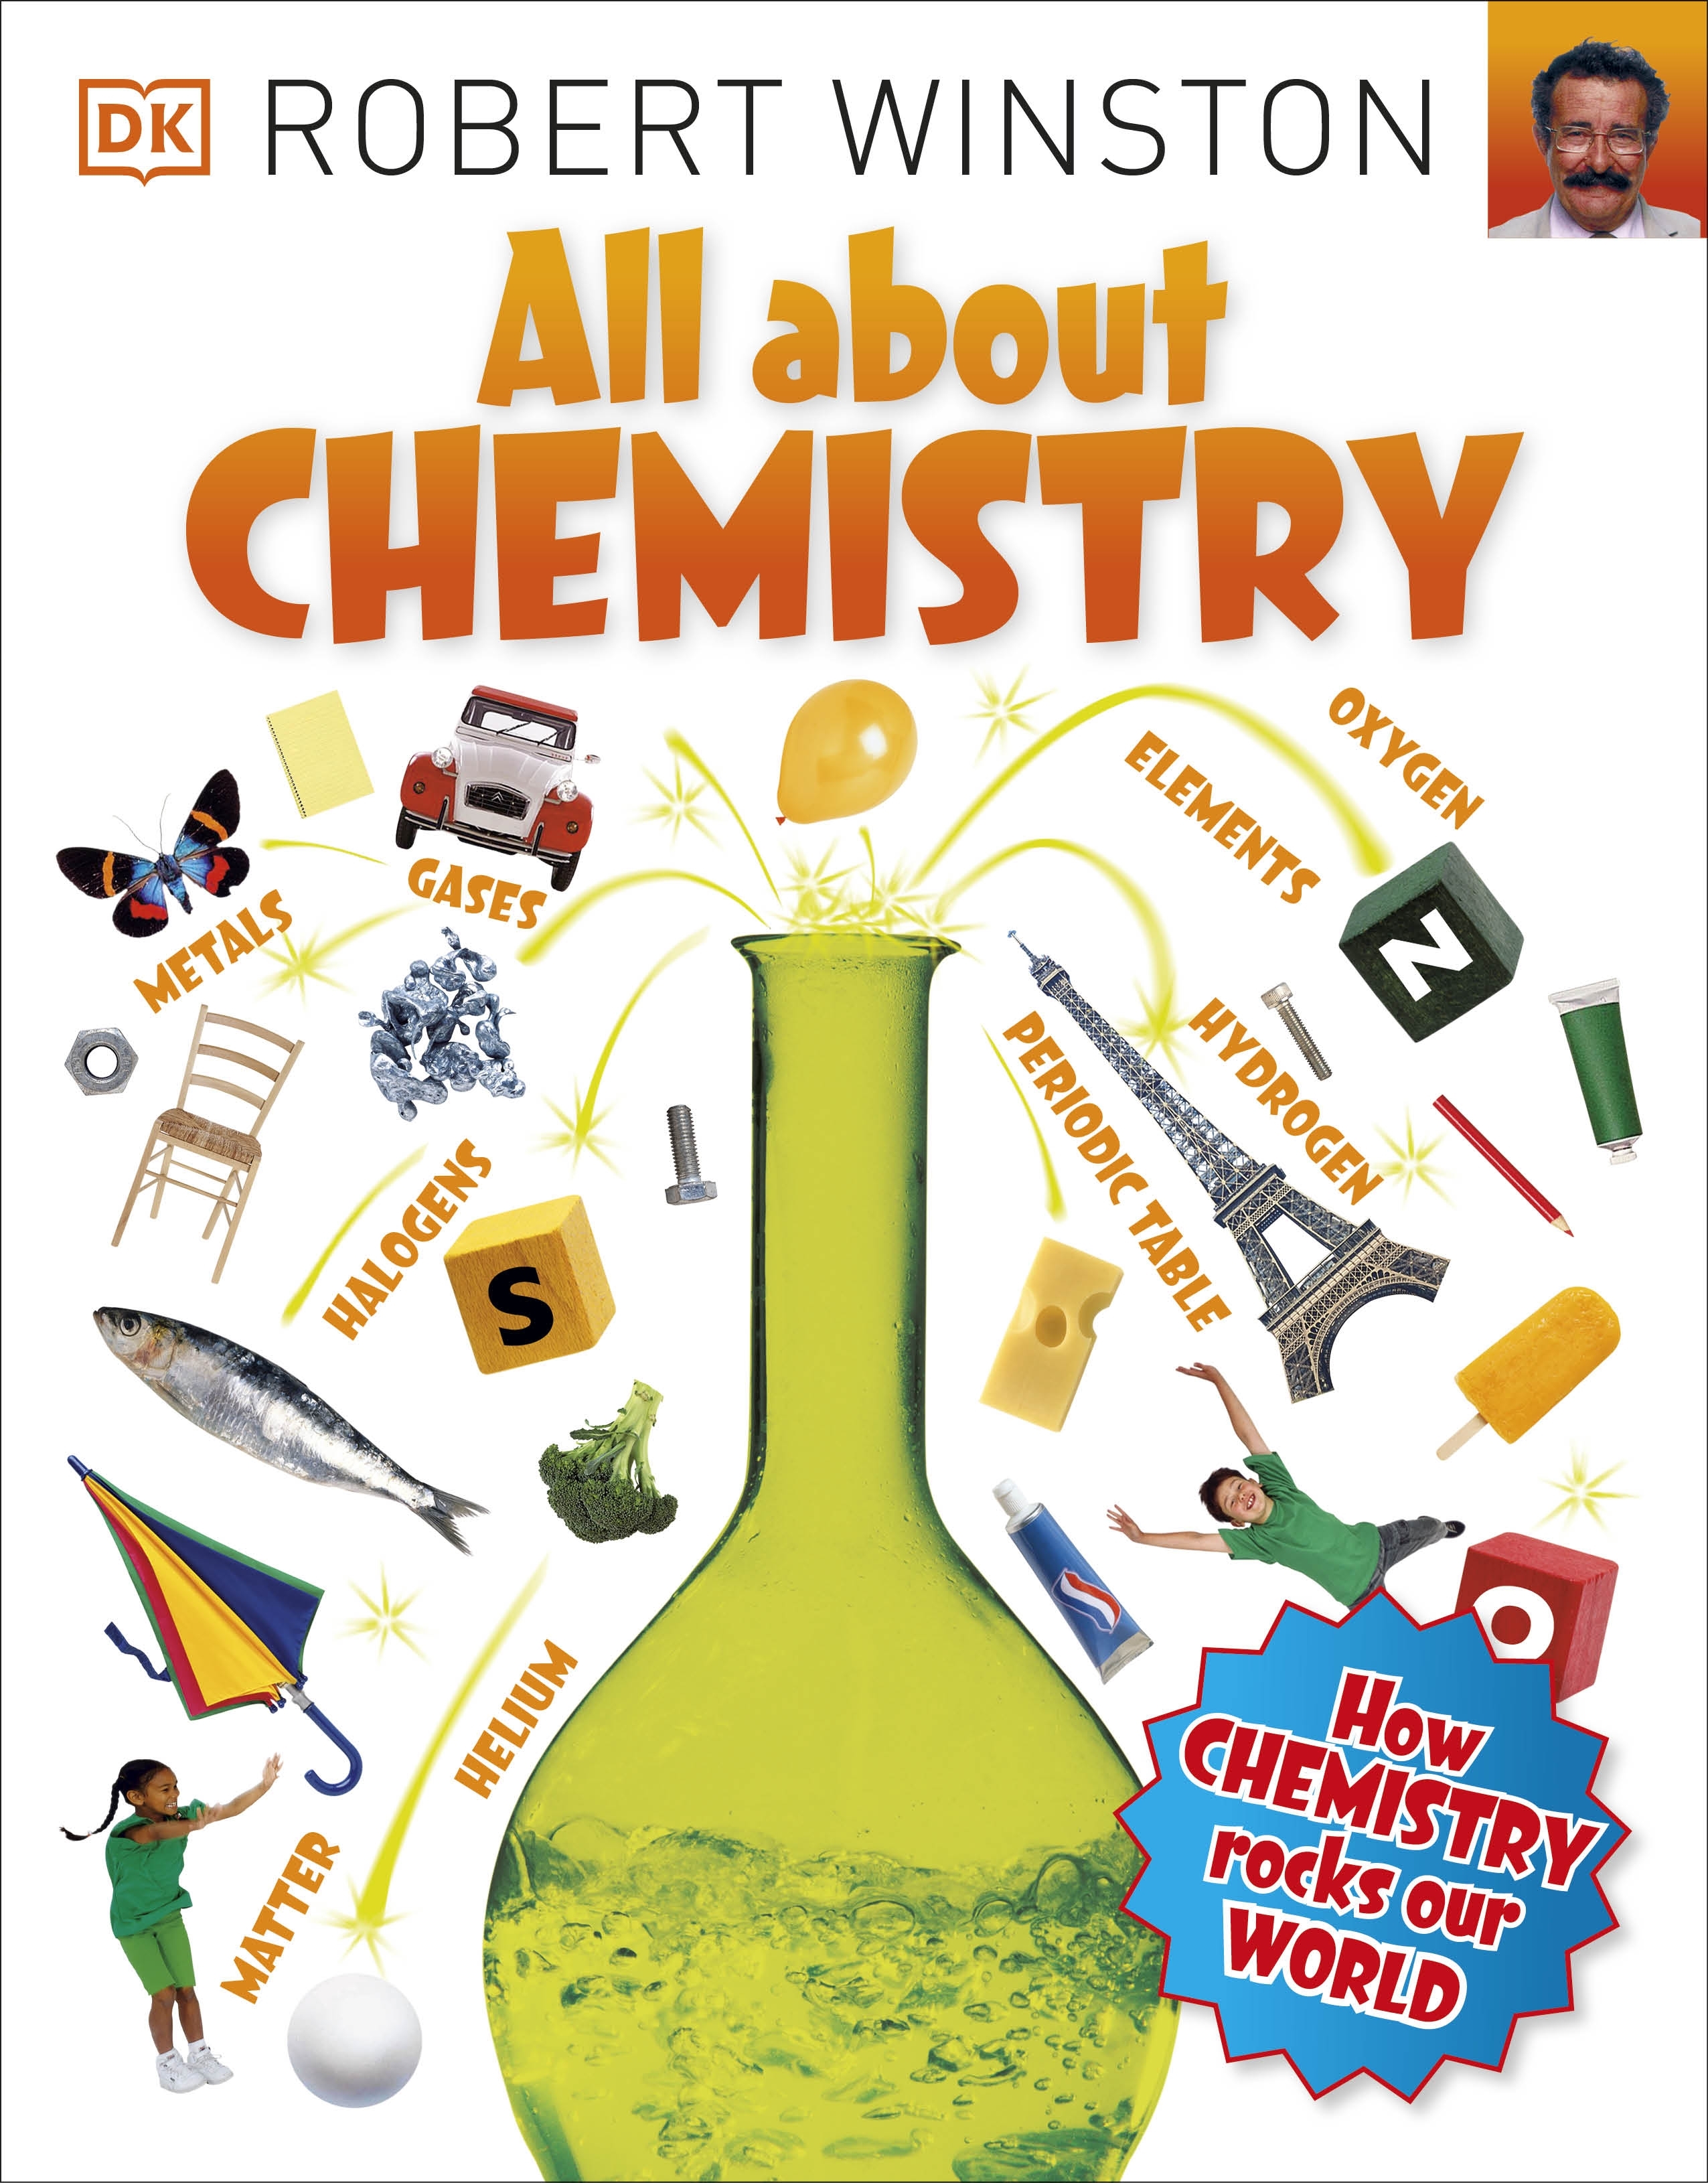 review book lessons in chemistry